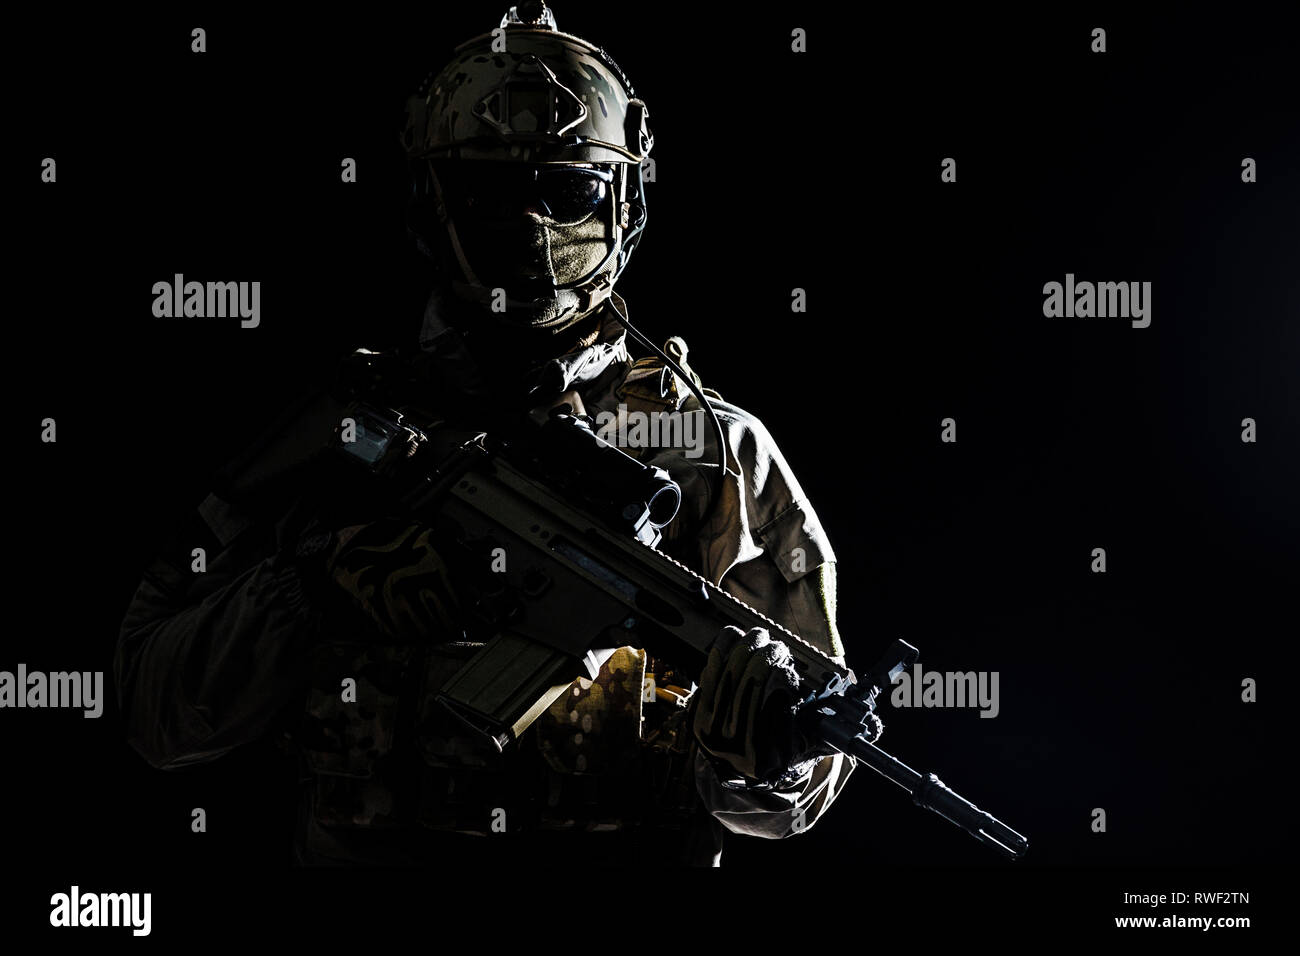 Army soldier in Protective Combat Uniform holding assault rifle. Stock Photo